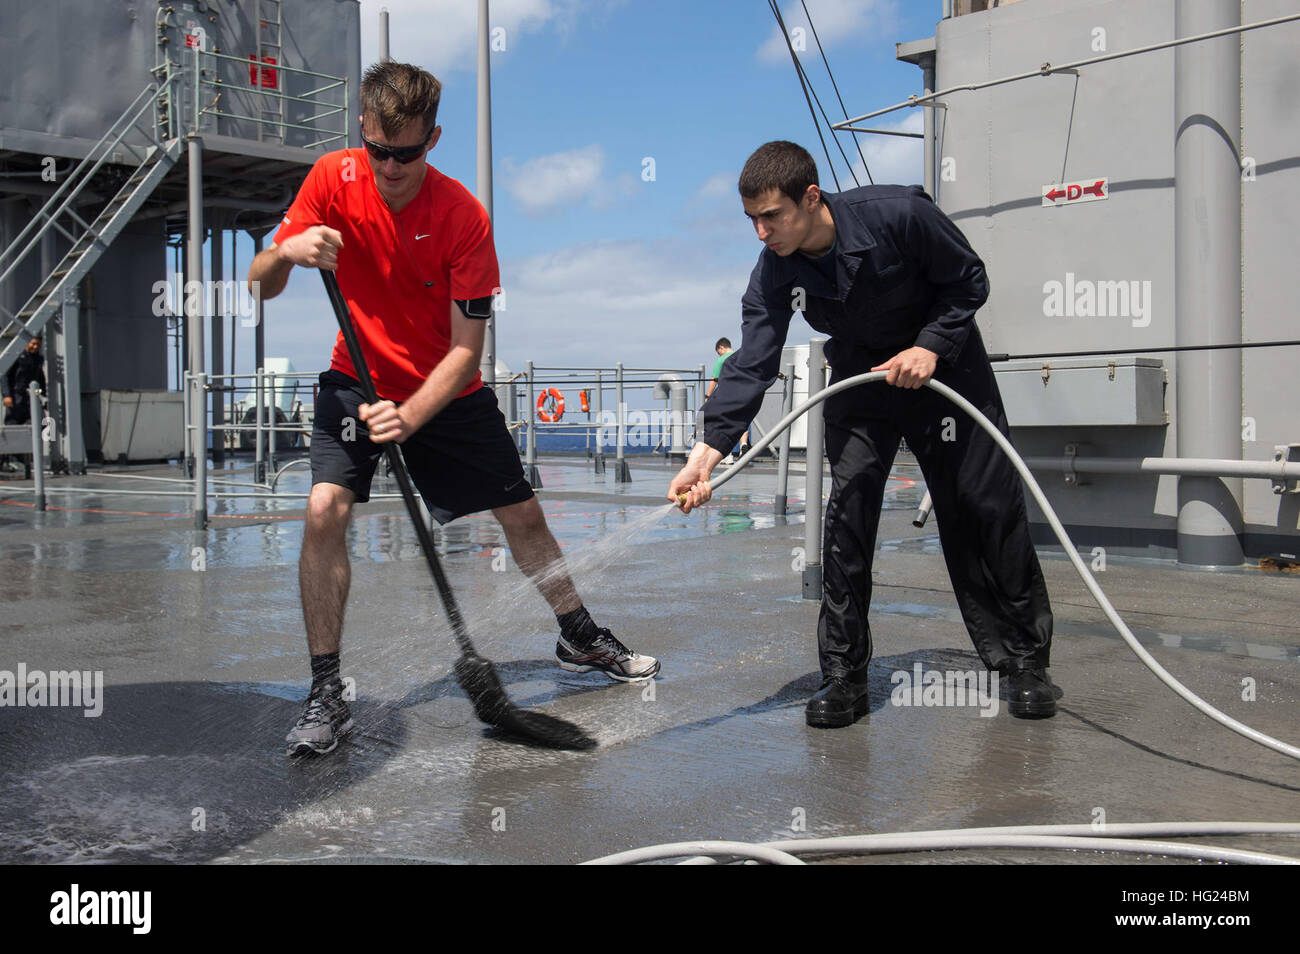 150210-N-CU914-090   PACIFIC OCEAN (Feb. 10, 2015) – Fire Controlman 1st Class Greggory A. Clark, left, from Roseville, Calif., and Cryptological Technician (Technical) Seaman Apprentice Scott J. Ferer, from Buffalo, N.Y., scrub the deck aboard the dock landing ship USS Comstock (LSD 45) during a fresh-water wash-down. Comstock, part of the Makin Island Amphibious Ready Group, and the embarked 11th Marine Expeditionary Unit are returning to homeport San Diego following a seven-month deployment to the Western Pacific and the U.S. Central Command areas of operation. (U.S. Navy photo by Mass Comm Stock Photo